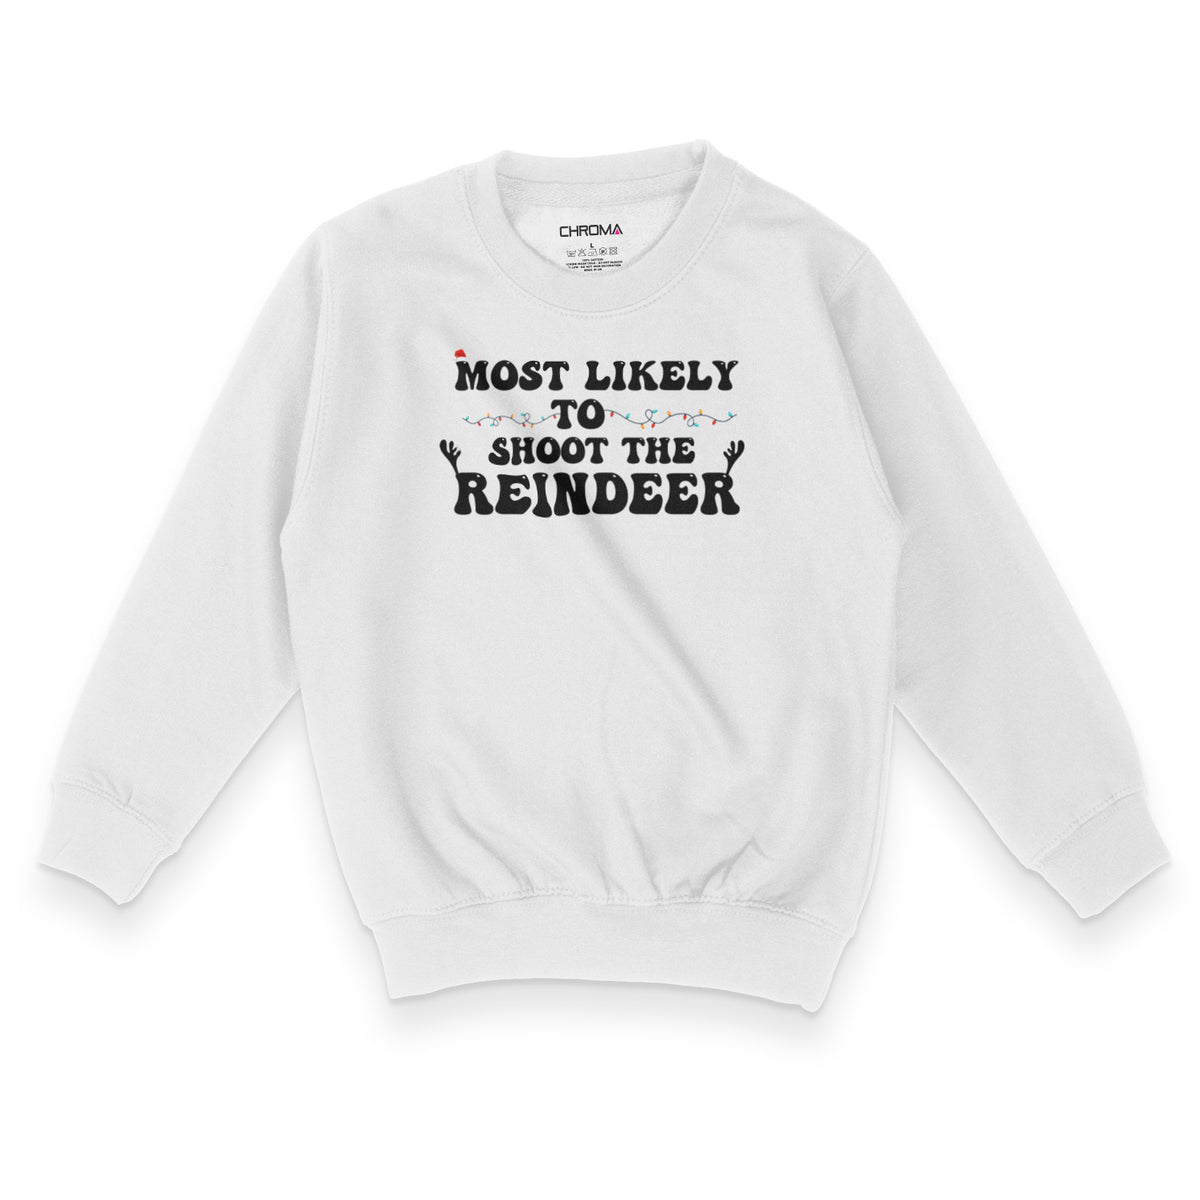 Most Likely To Shoot The Reindeer | Kid's Christmas Sweatshirt Chroma Clothing